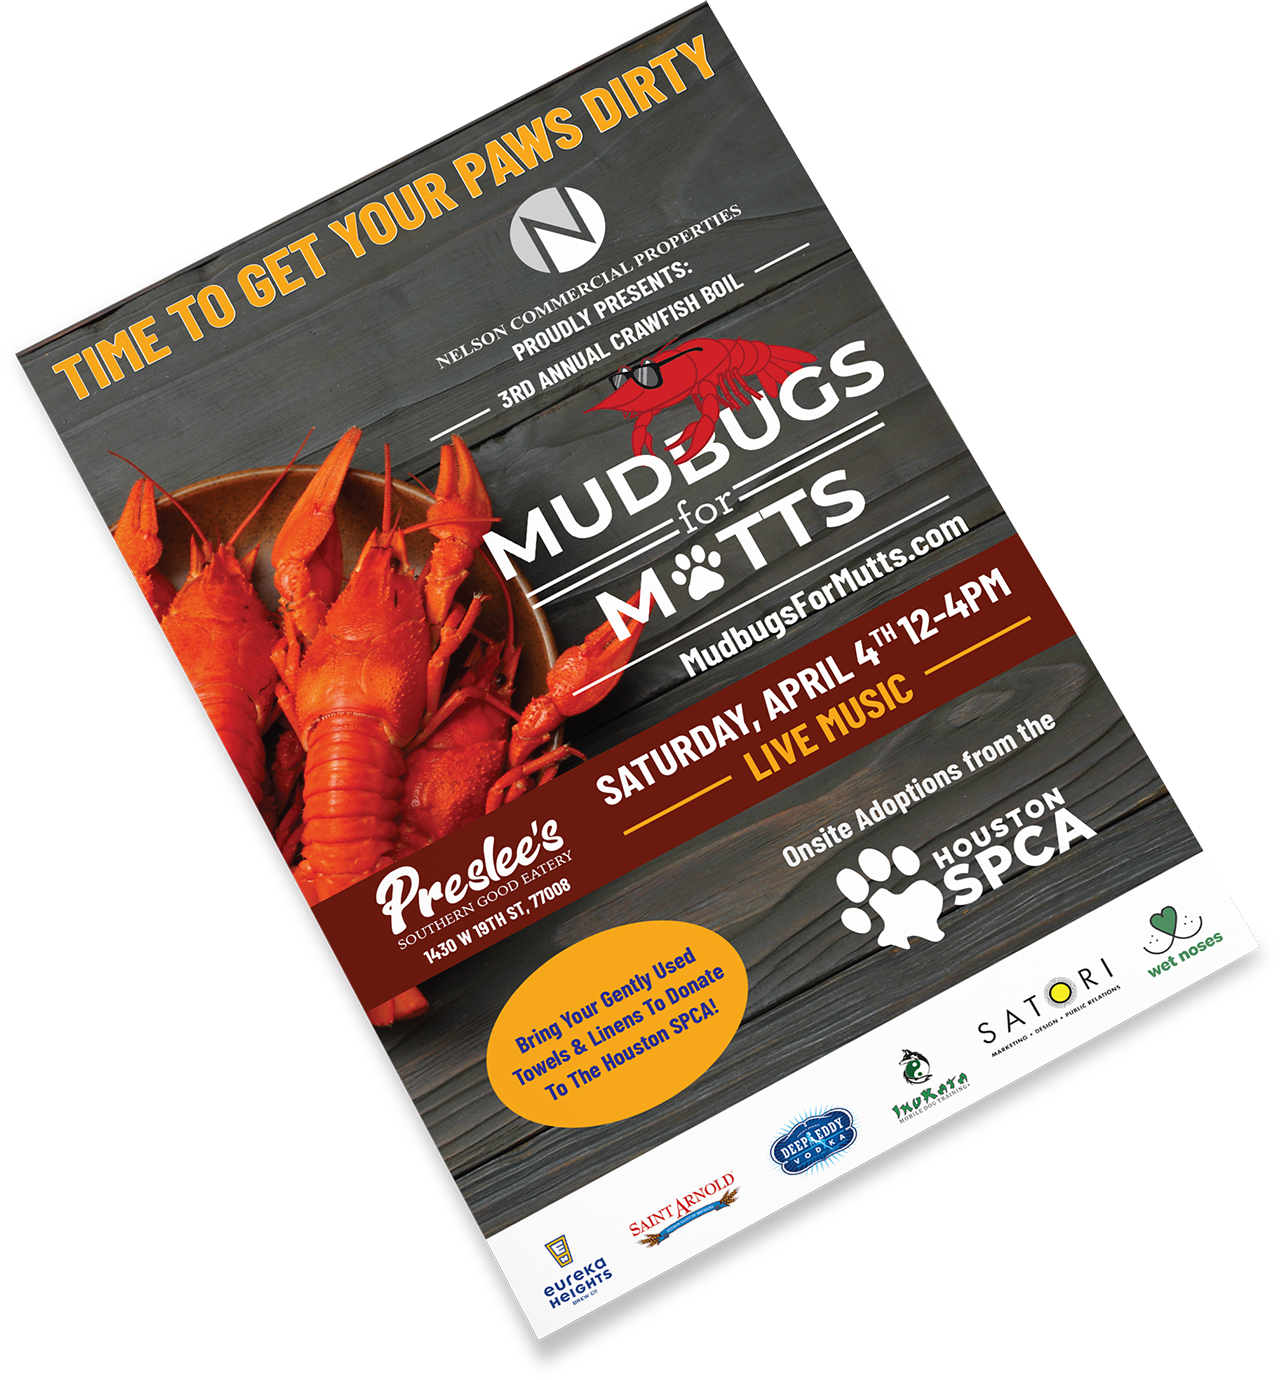 Mudbugs for Mutts Flyer